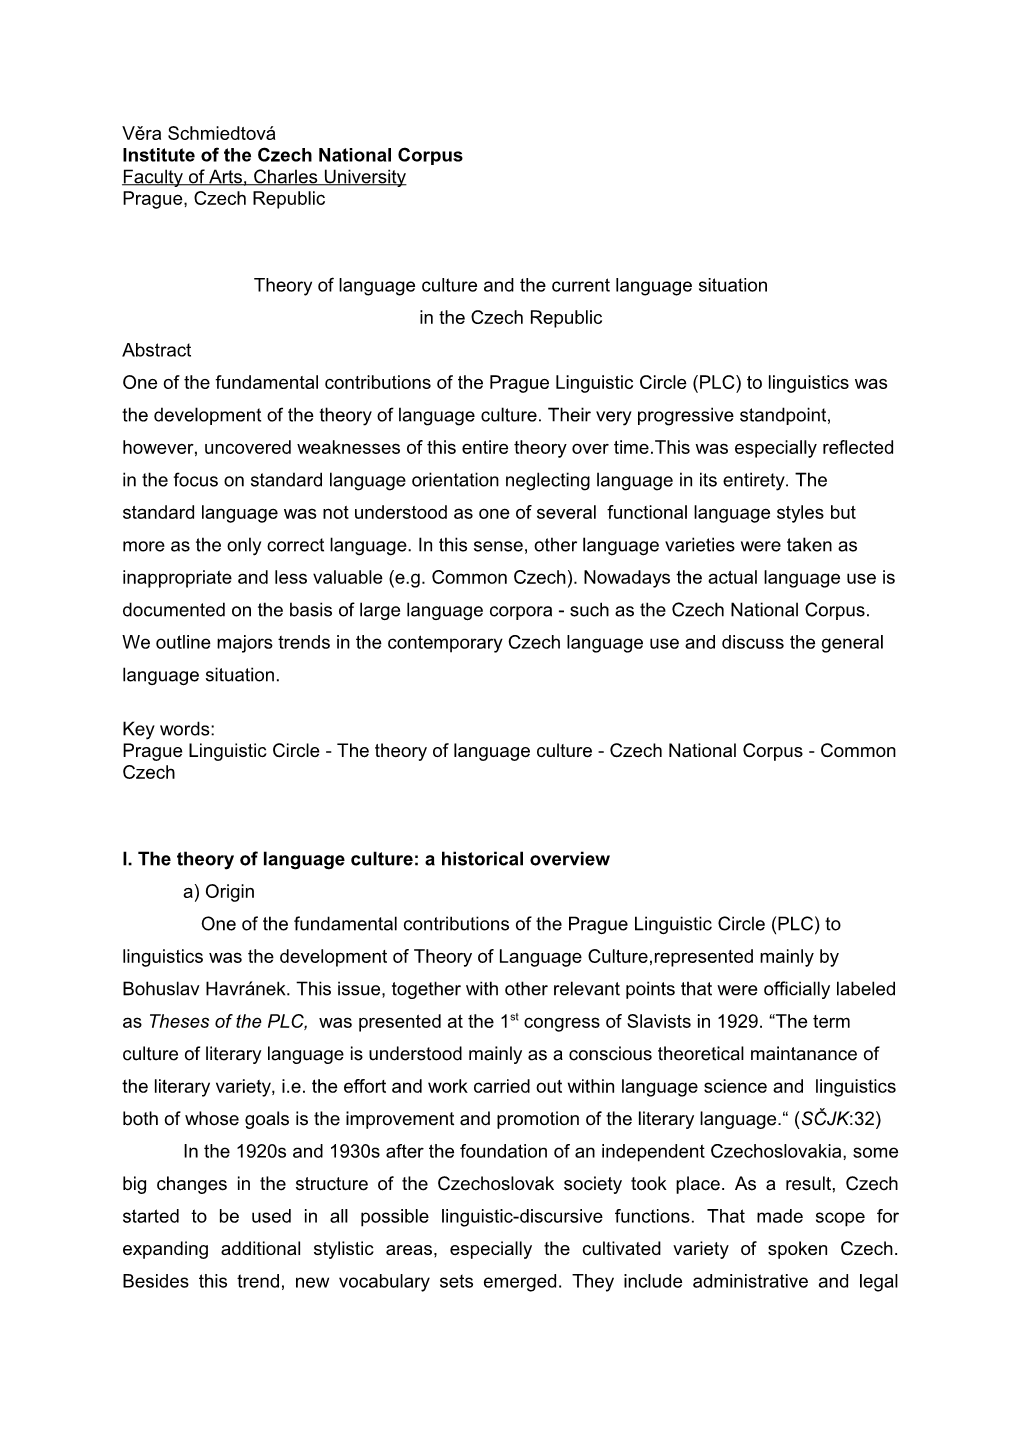 Theory of Language Culture and the Current Language Situation in the Czech Republic